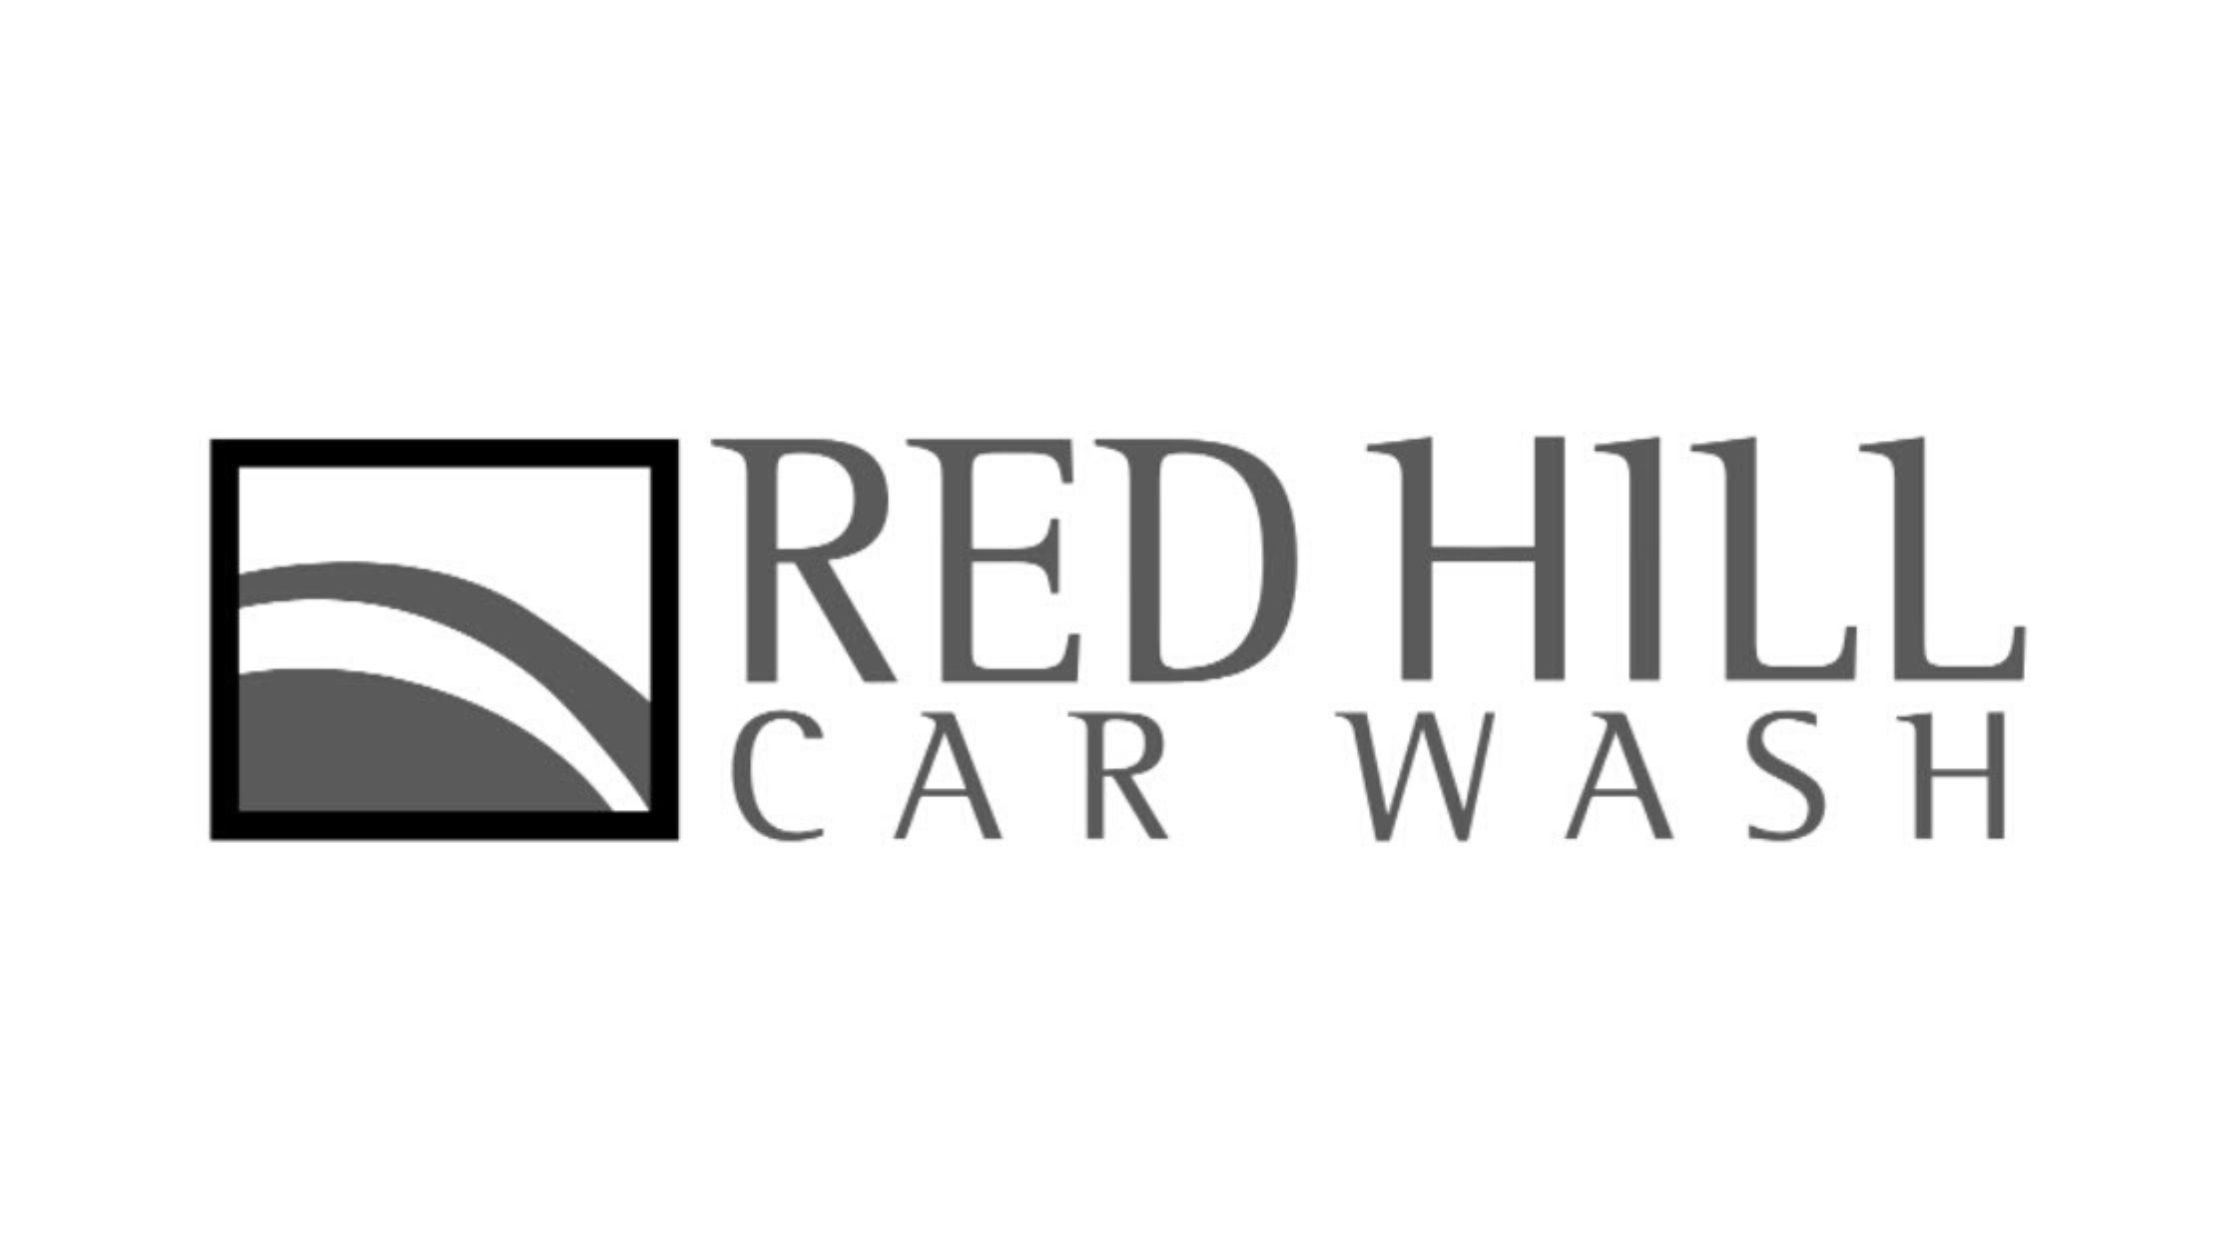 Red Hill Car Wash